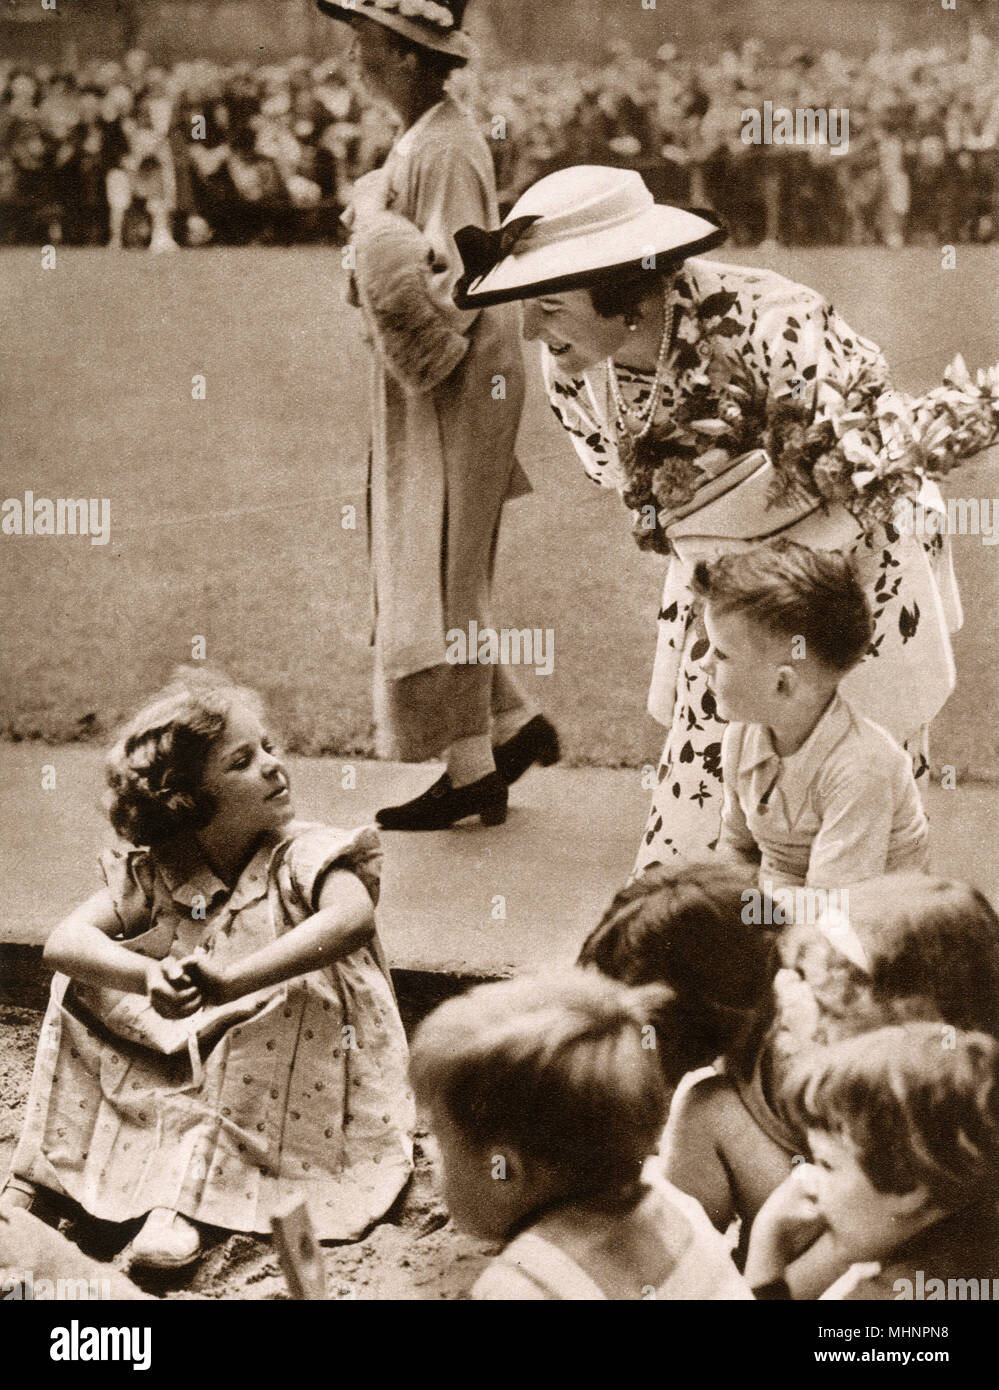 On first day of the court moving from full to half-mourning, Elizabeth, Duchess of York (later the Queen Mother 1900-2002), opens Corams Field and Harmsworth Memorial Playground, saving the old Foundling Hospital site as playgrounds for the children. The Duchess is here talking to children playing in the sandpit.     Date: 1936 Stock Photo